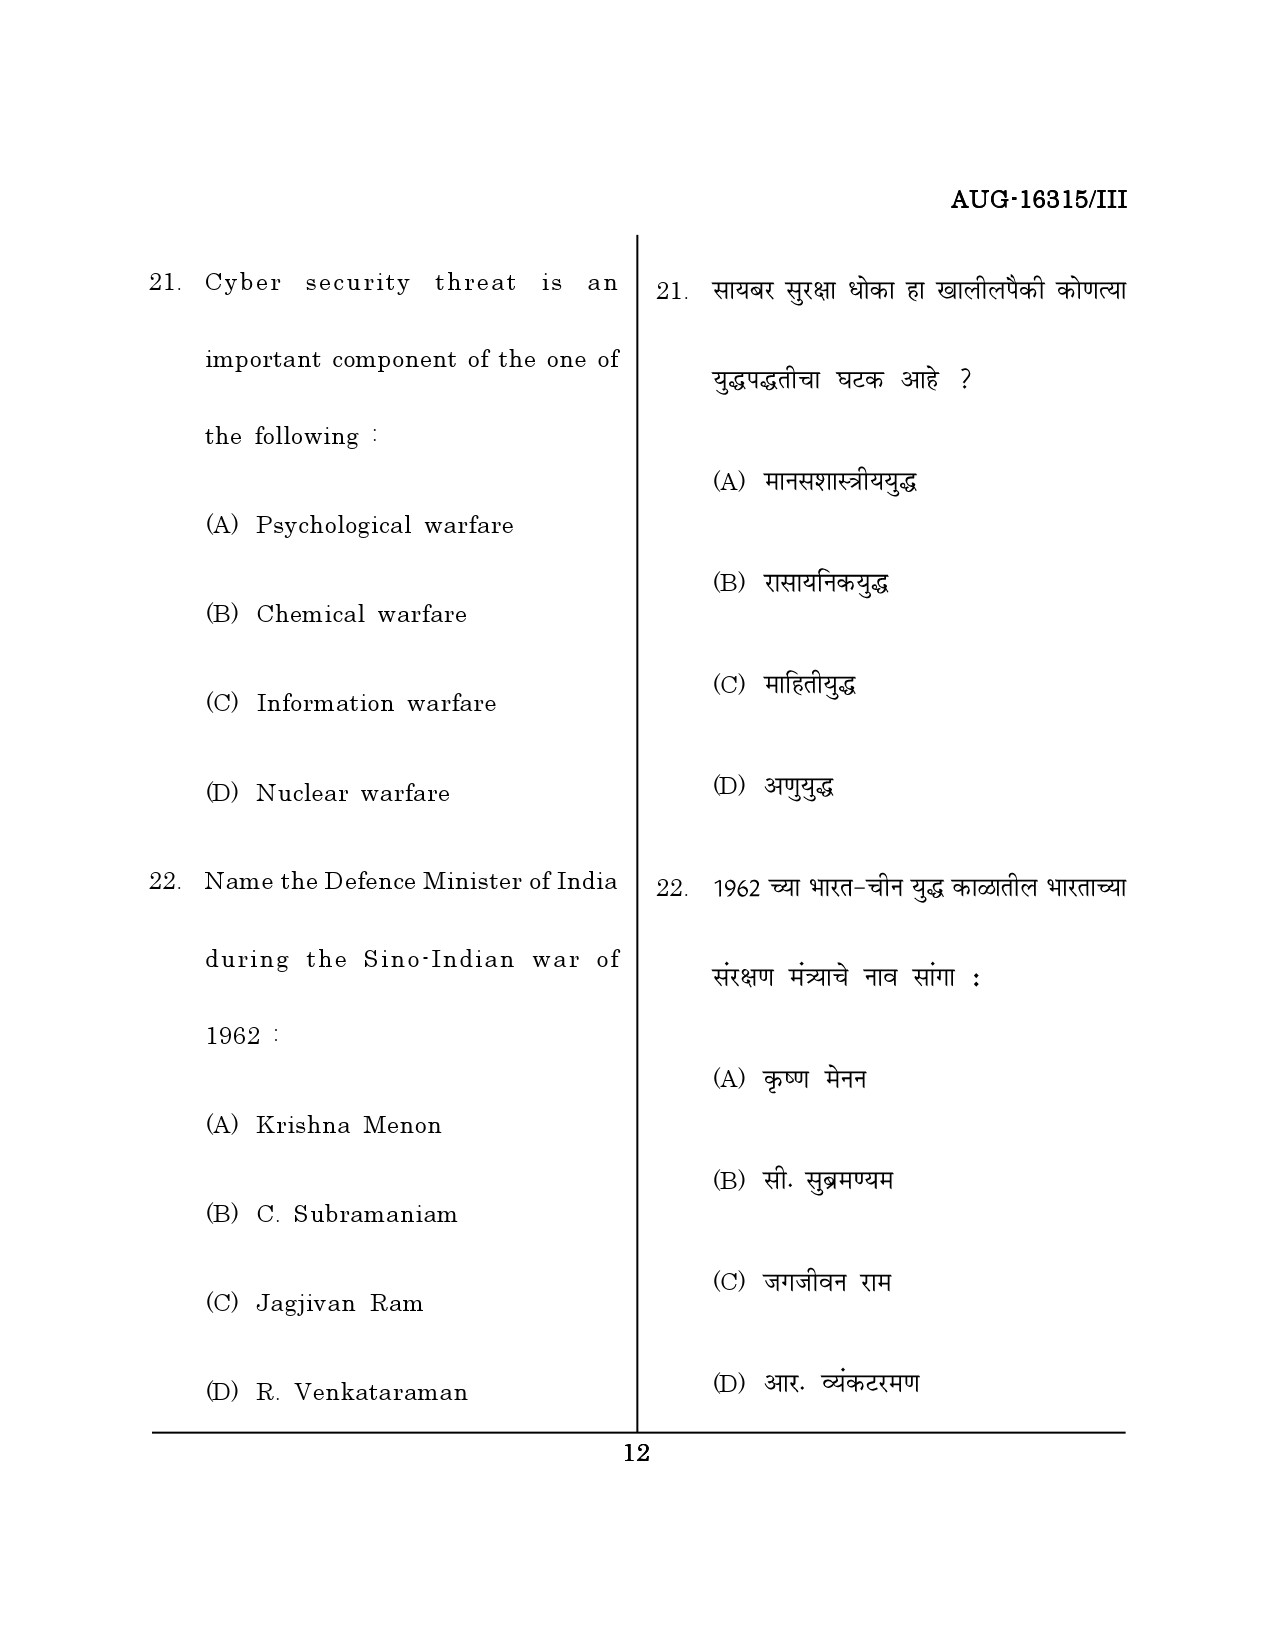 Maharashtra SET Defence and Strategic Studies Question Paper III August 2015 11